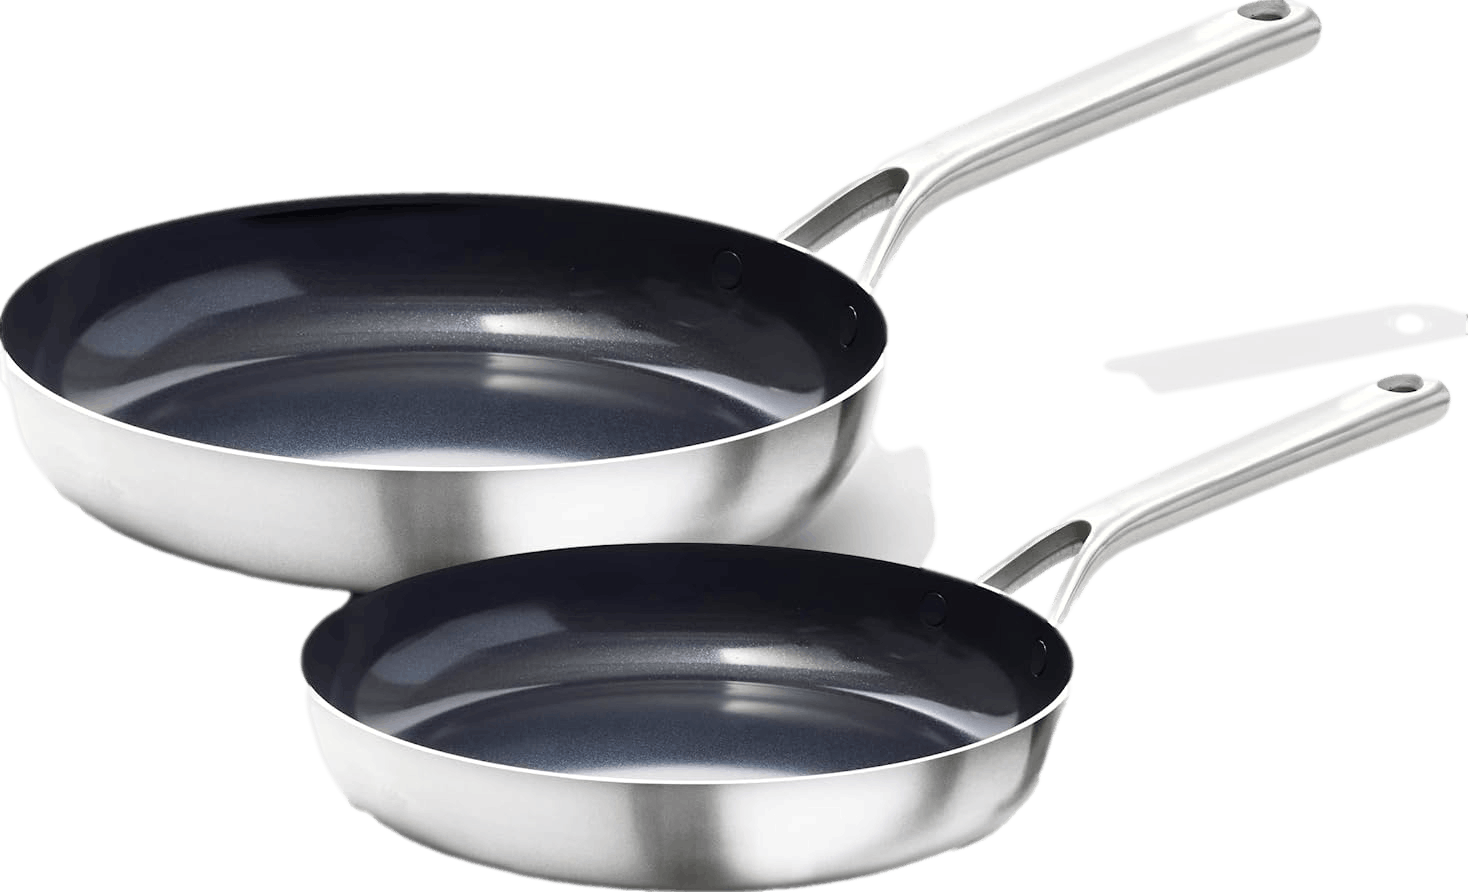 KitchenAid 5-Ply Stainless Steel & Nonstick Frying Pan 2pc Se